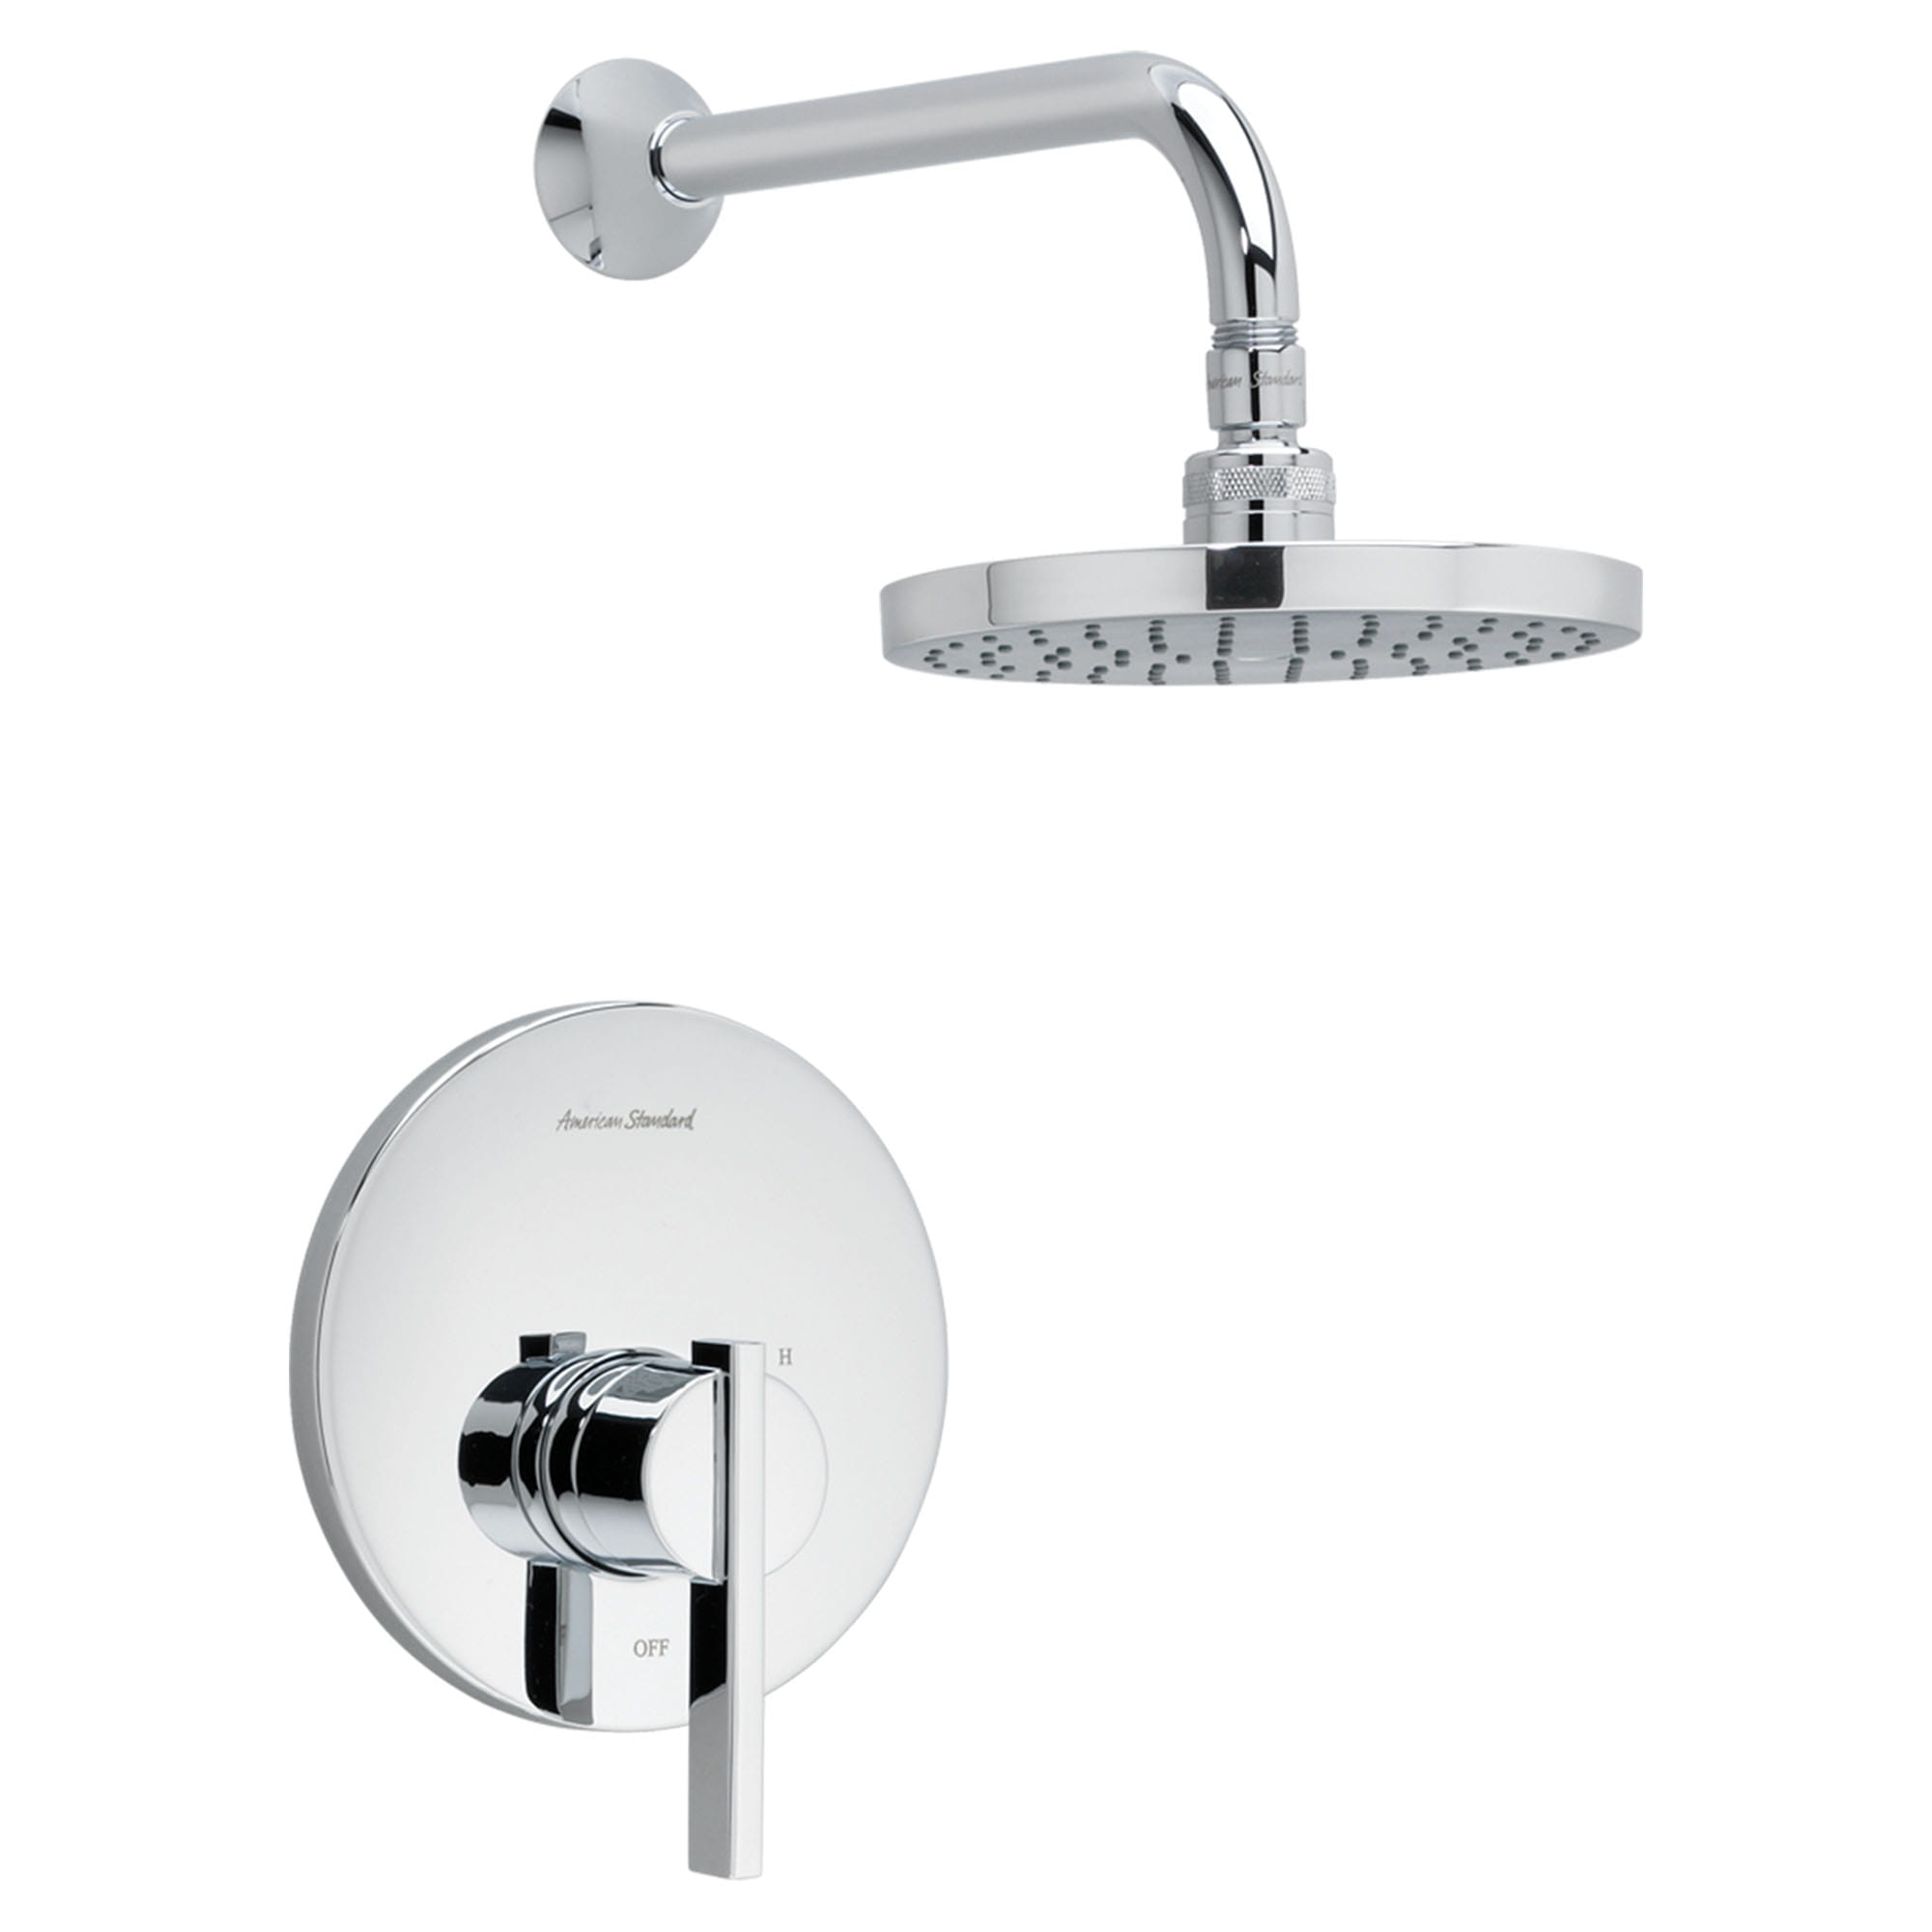 Boulevard 2.5 GPM Shower Trim Kit with Pressure Balance Cartridge and Lever Handle